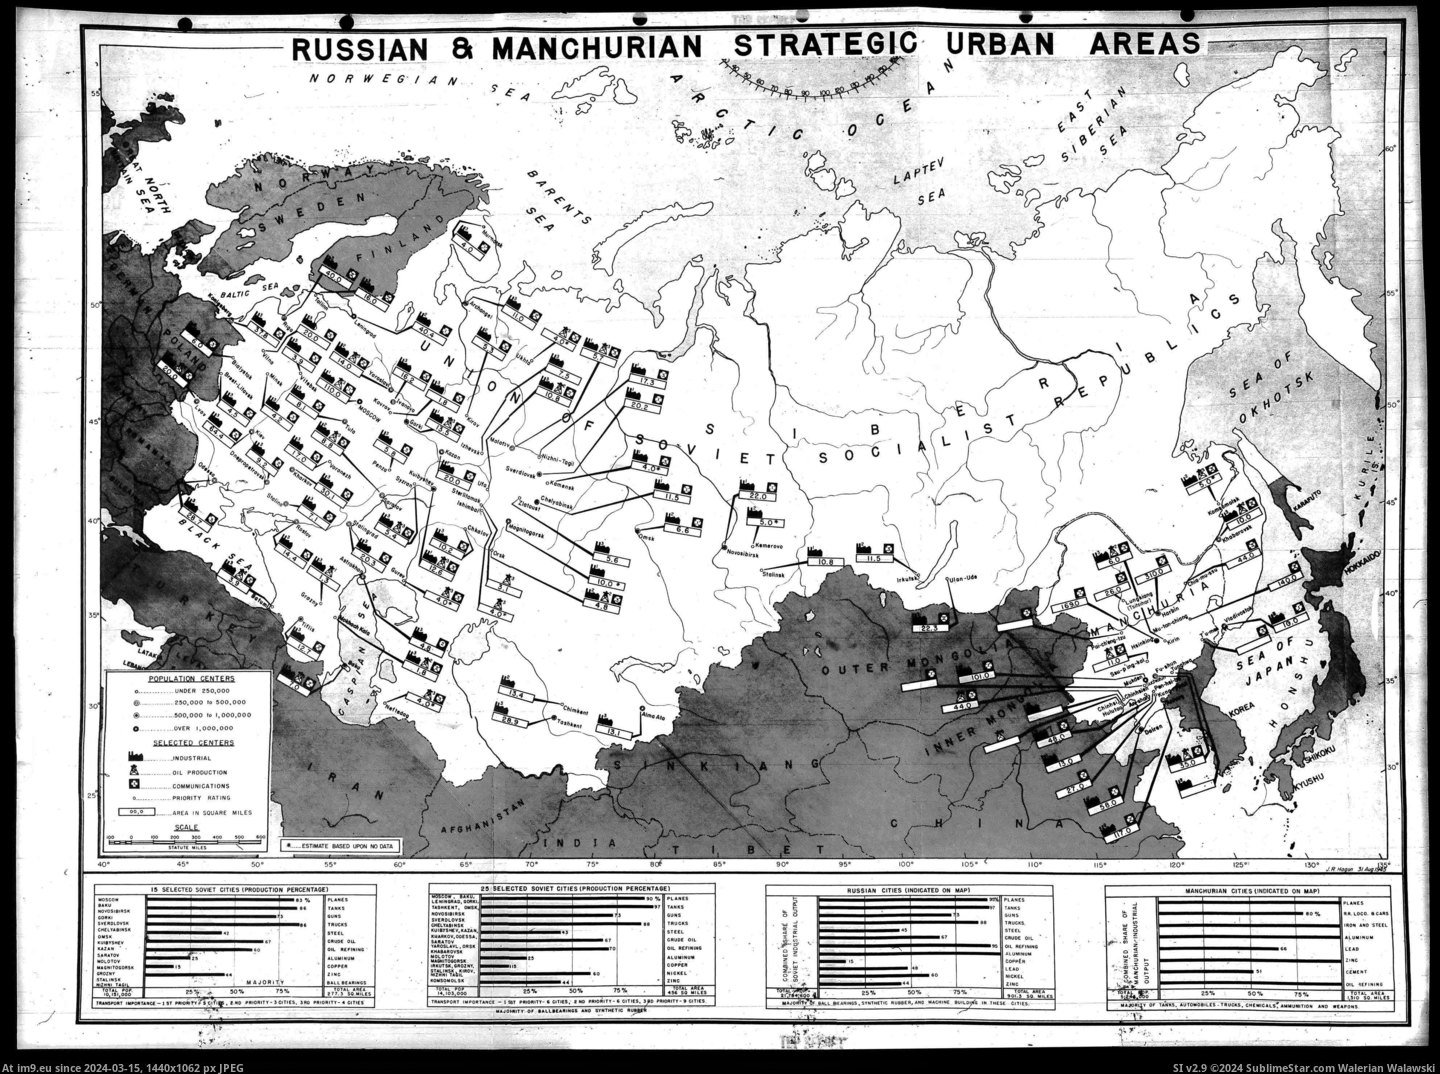 #Map #Russia #September #Strategic #Manchuria #Stockpile #Requirements #Atomic #Targets [Mapporn] The First Atomic Stockpile Requirements (September 1945), Map of strategic targets in Russia and Manchuria. [3972 x 29 Pic. (Изображение из альбом My r/MAPS favs))